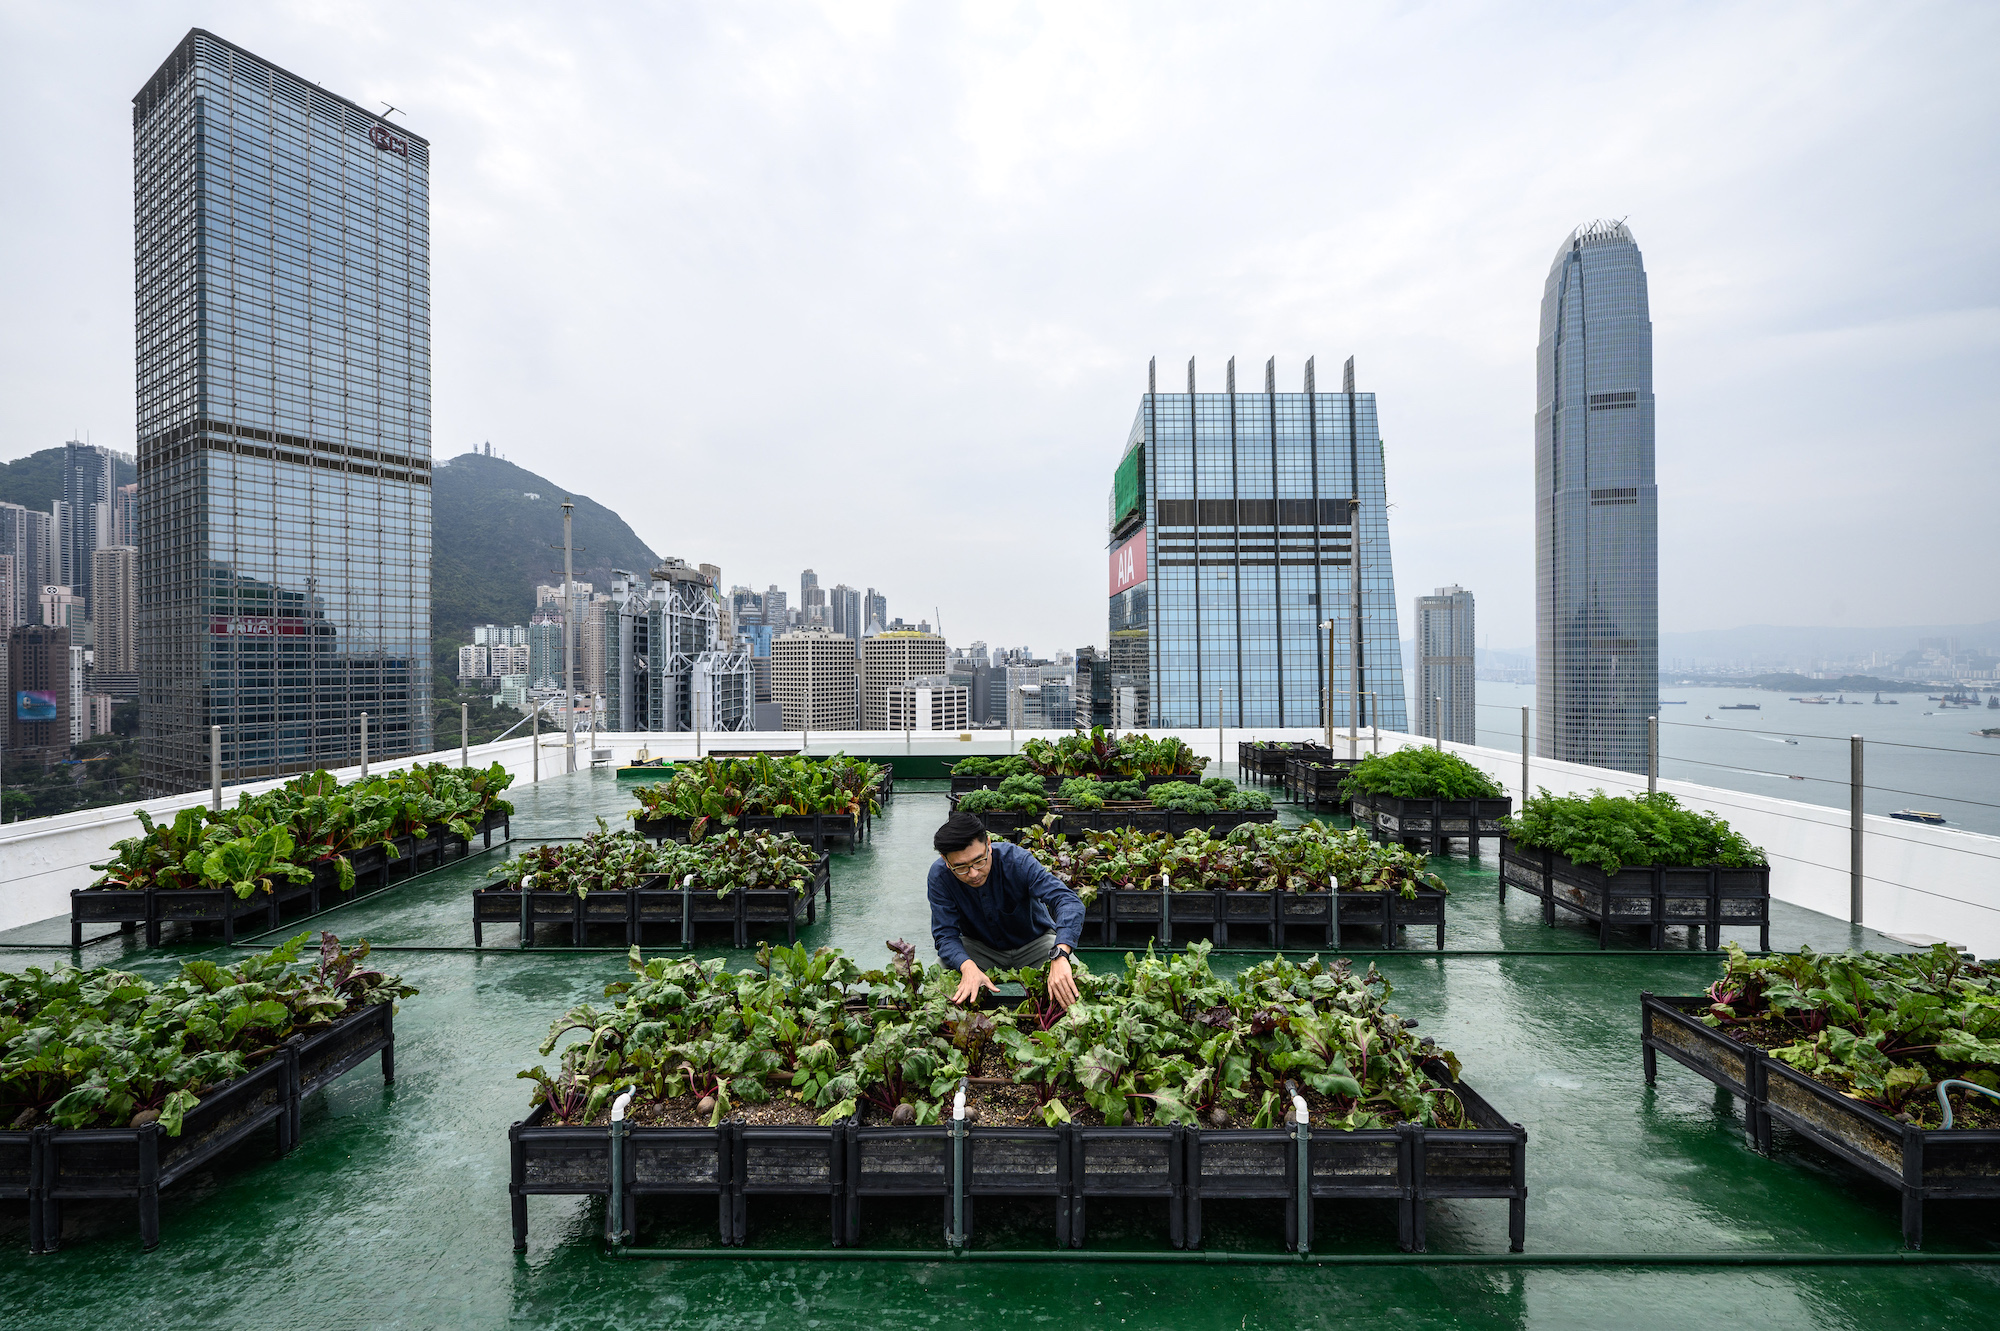 More than 60 farms have sprouted across Hong Kong since 2015